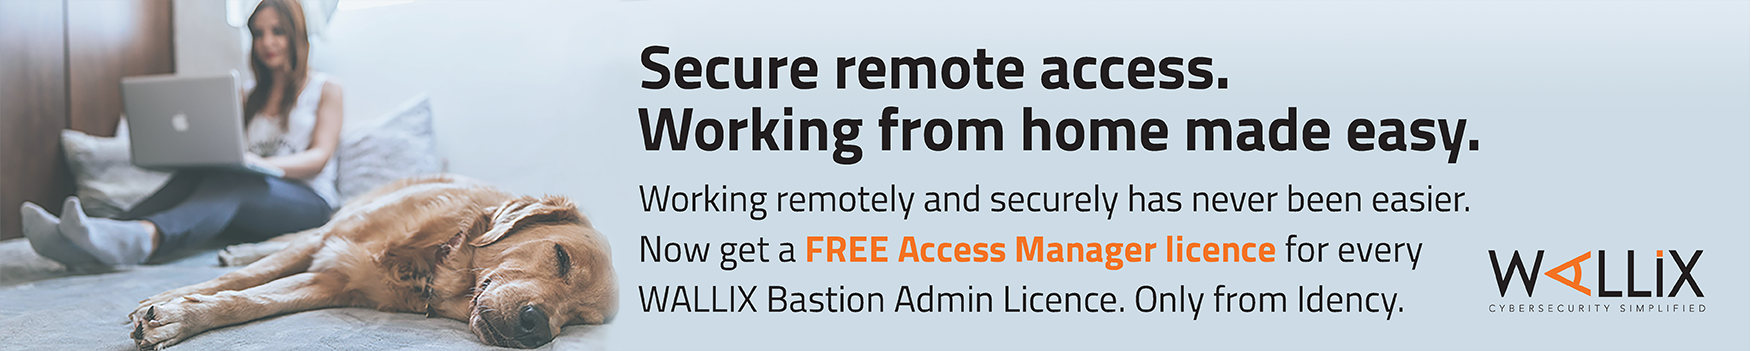 WALLIX remote access offer banner